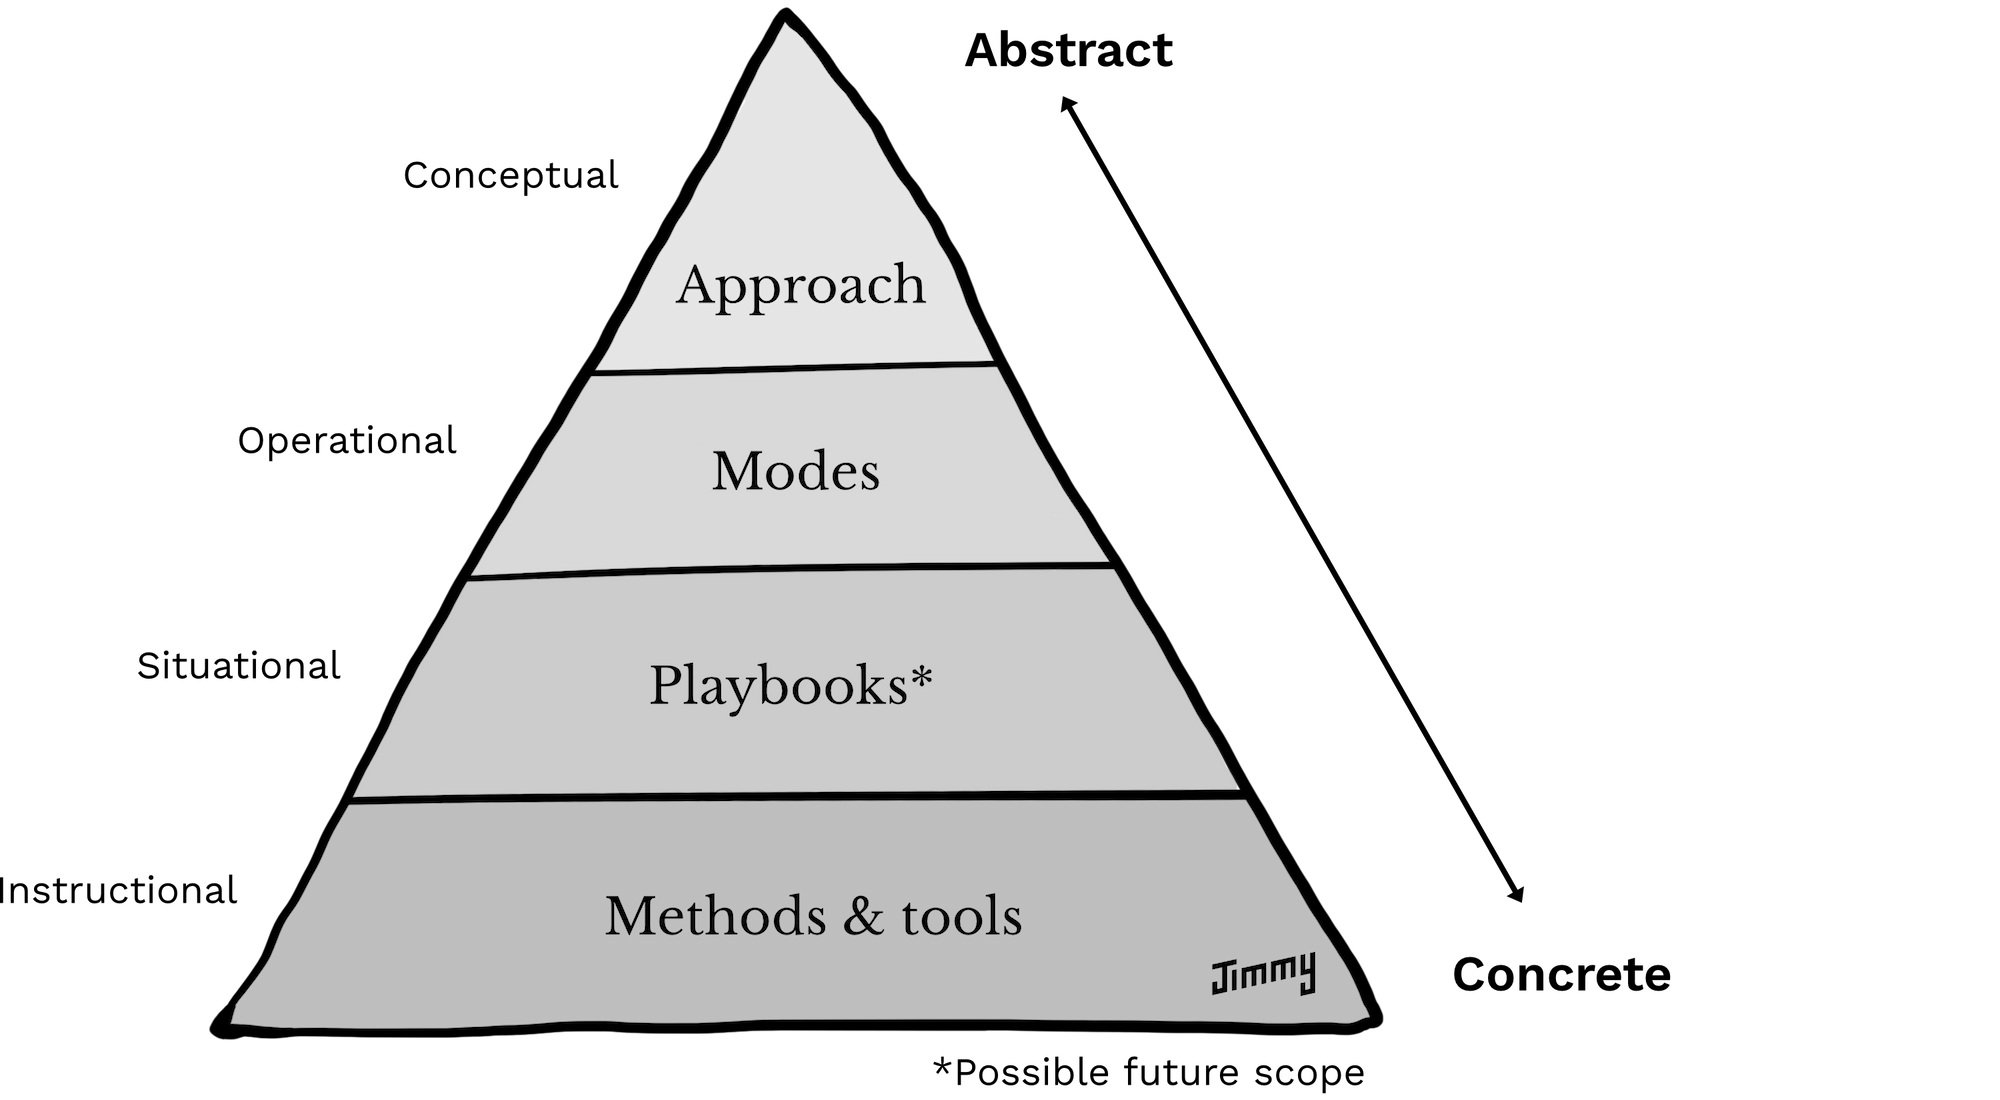 A triangle showing 4 layers. The top layer is labeled 'Approach', the second layer is labeled 'Modes', the third layer is labeled 'Playbooks?', and the bottom layer is labeled 'methods & tools'.